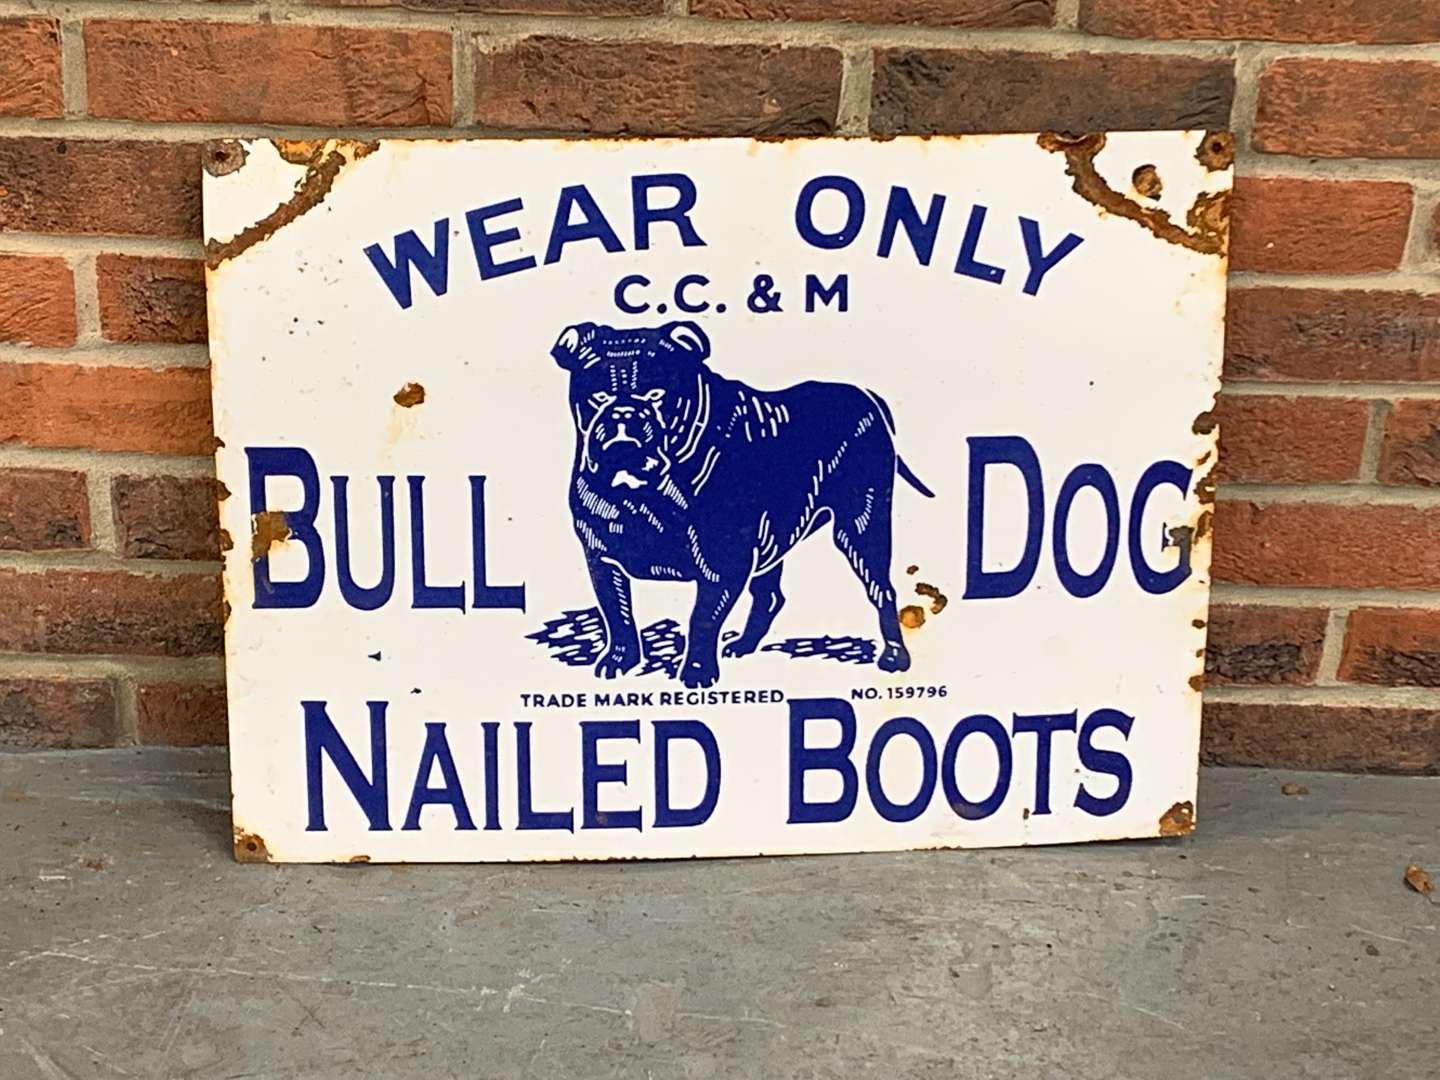 <p>Wear Only Bull Dog Nailed Boots Enamel Sign</p>